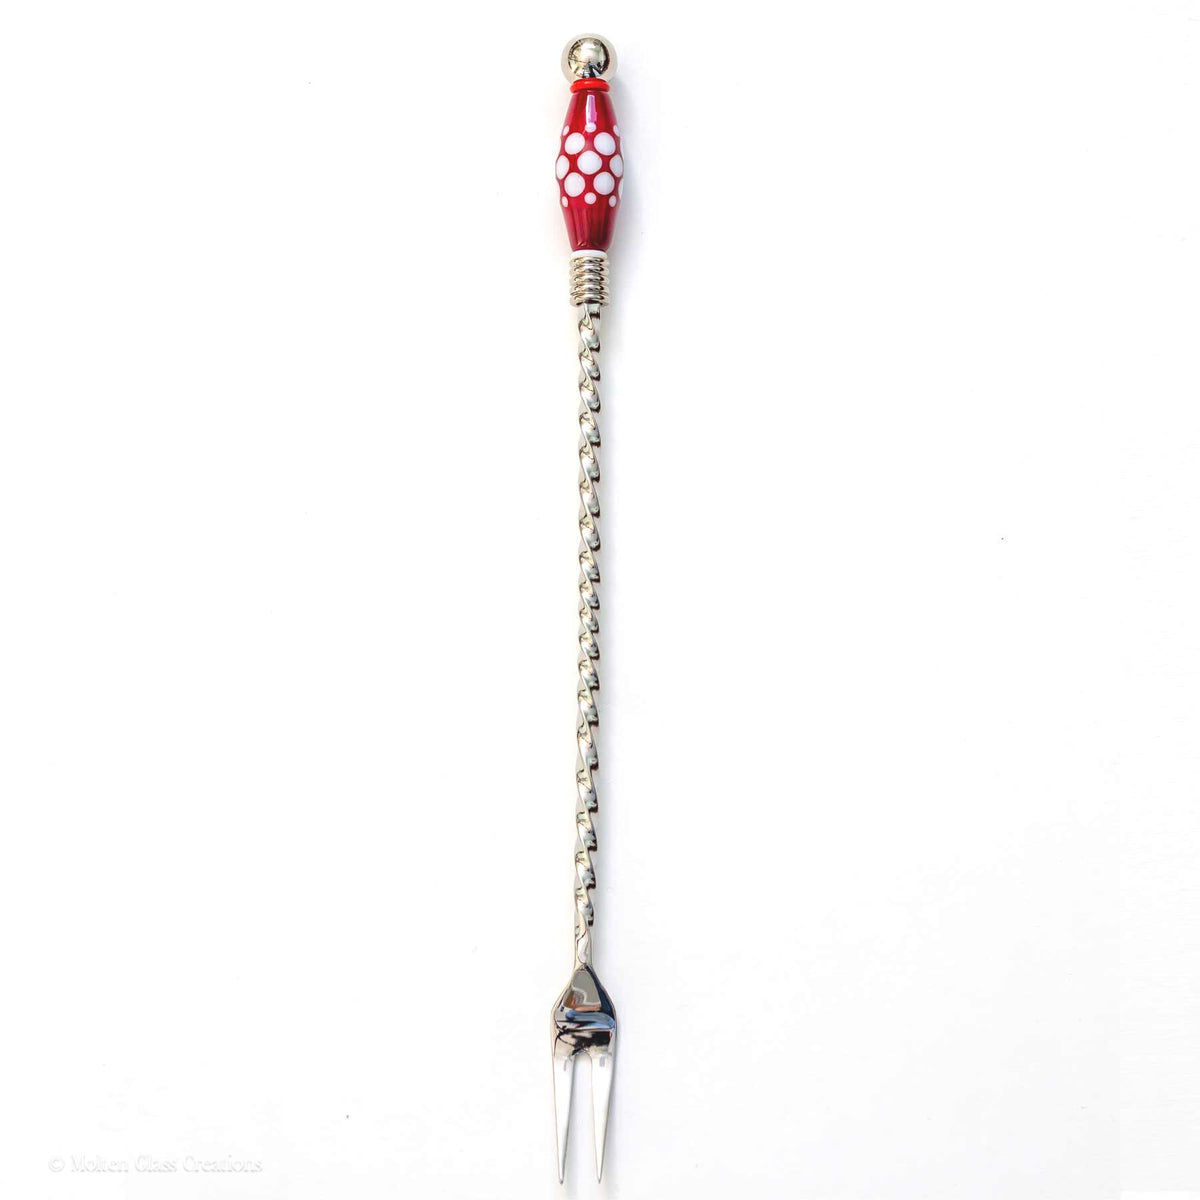 Beaded Pickle Fork - Red with Dots